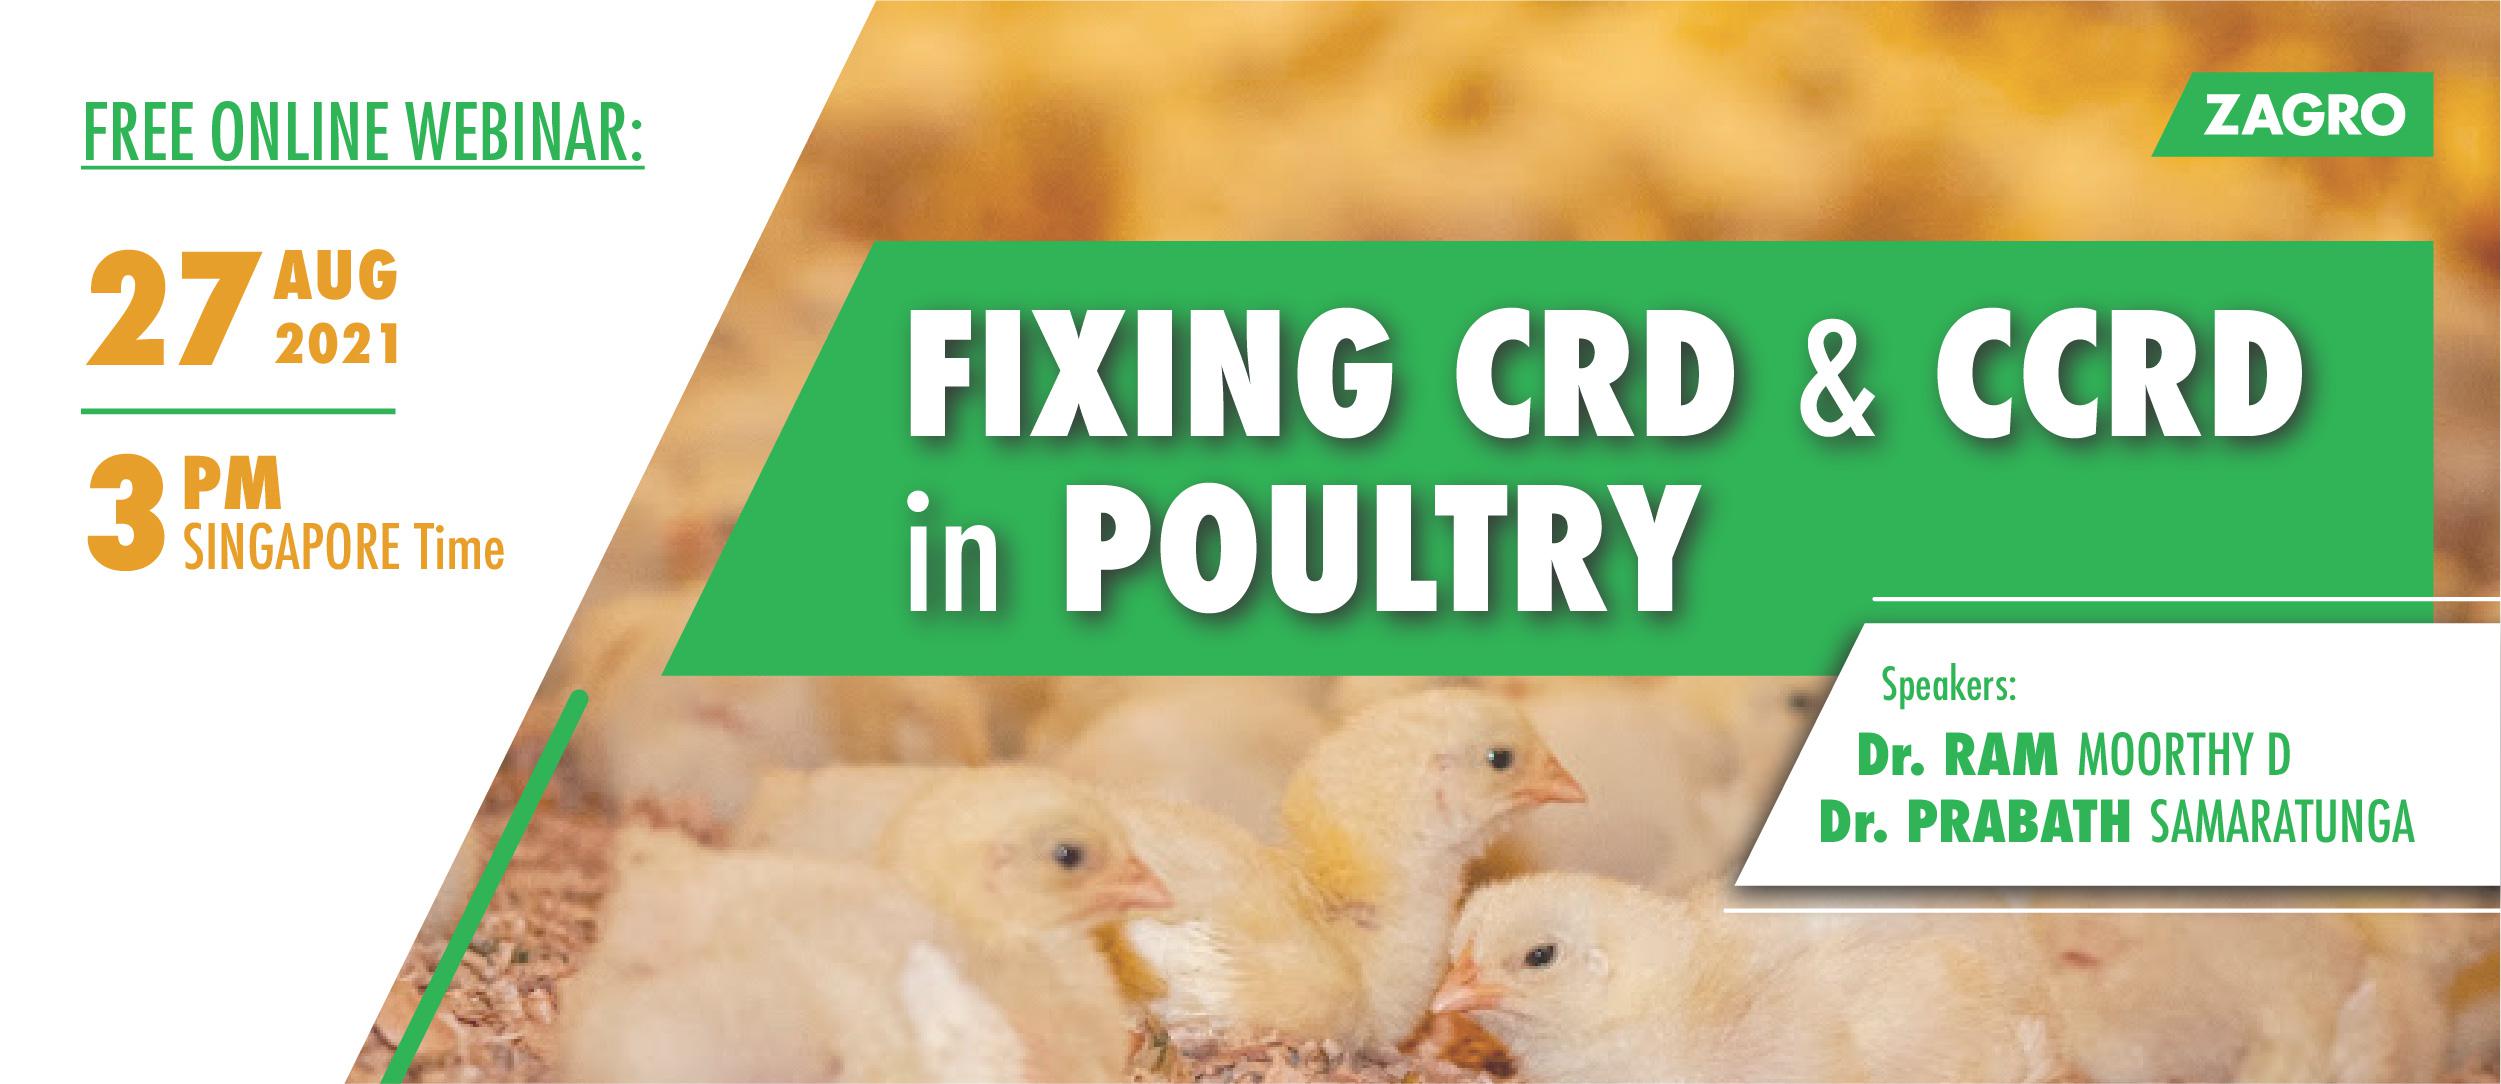 Fixing CRD and CCRD in Poultry